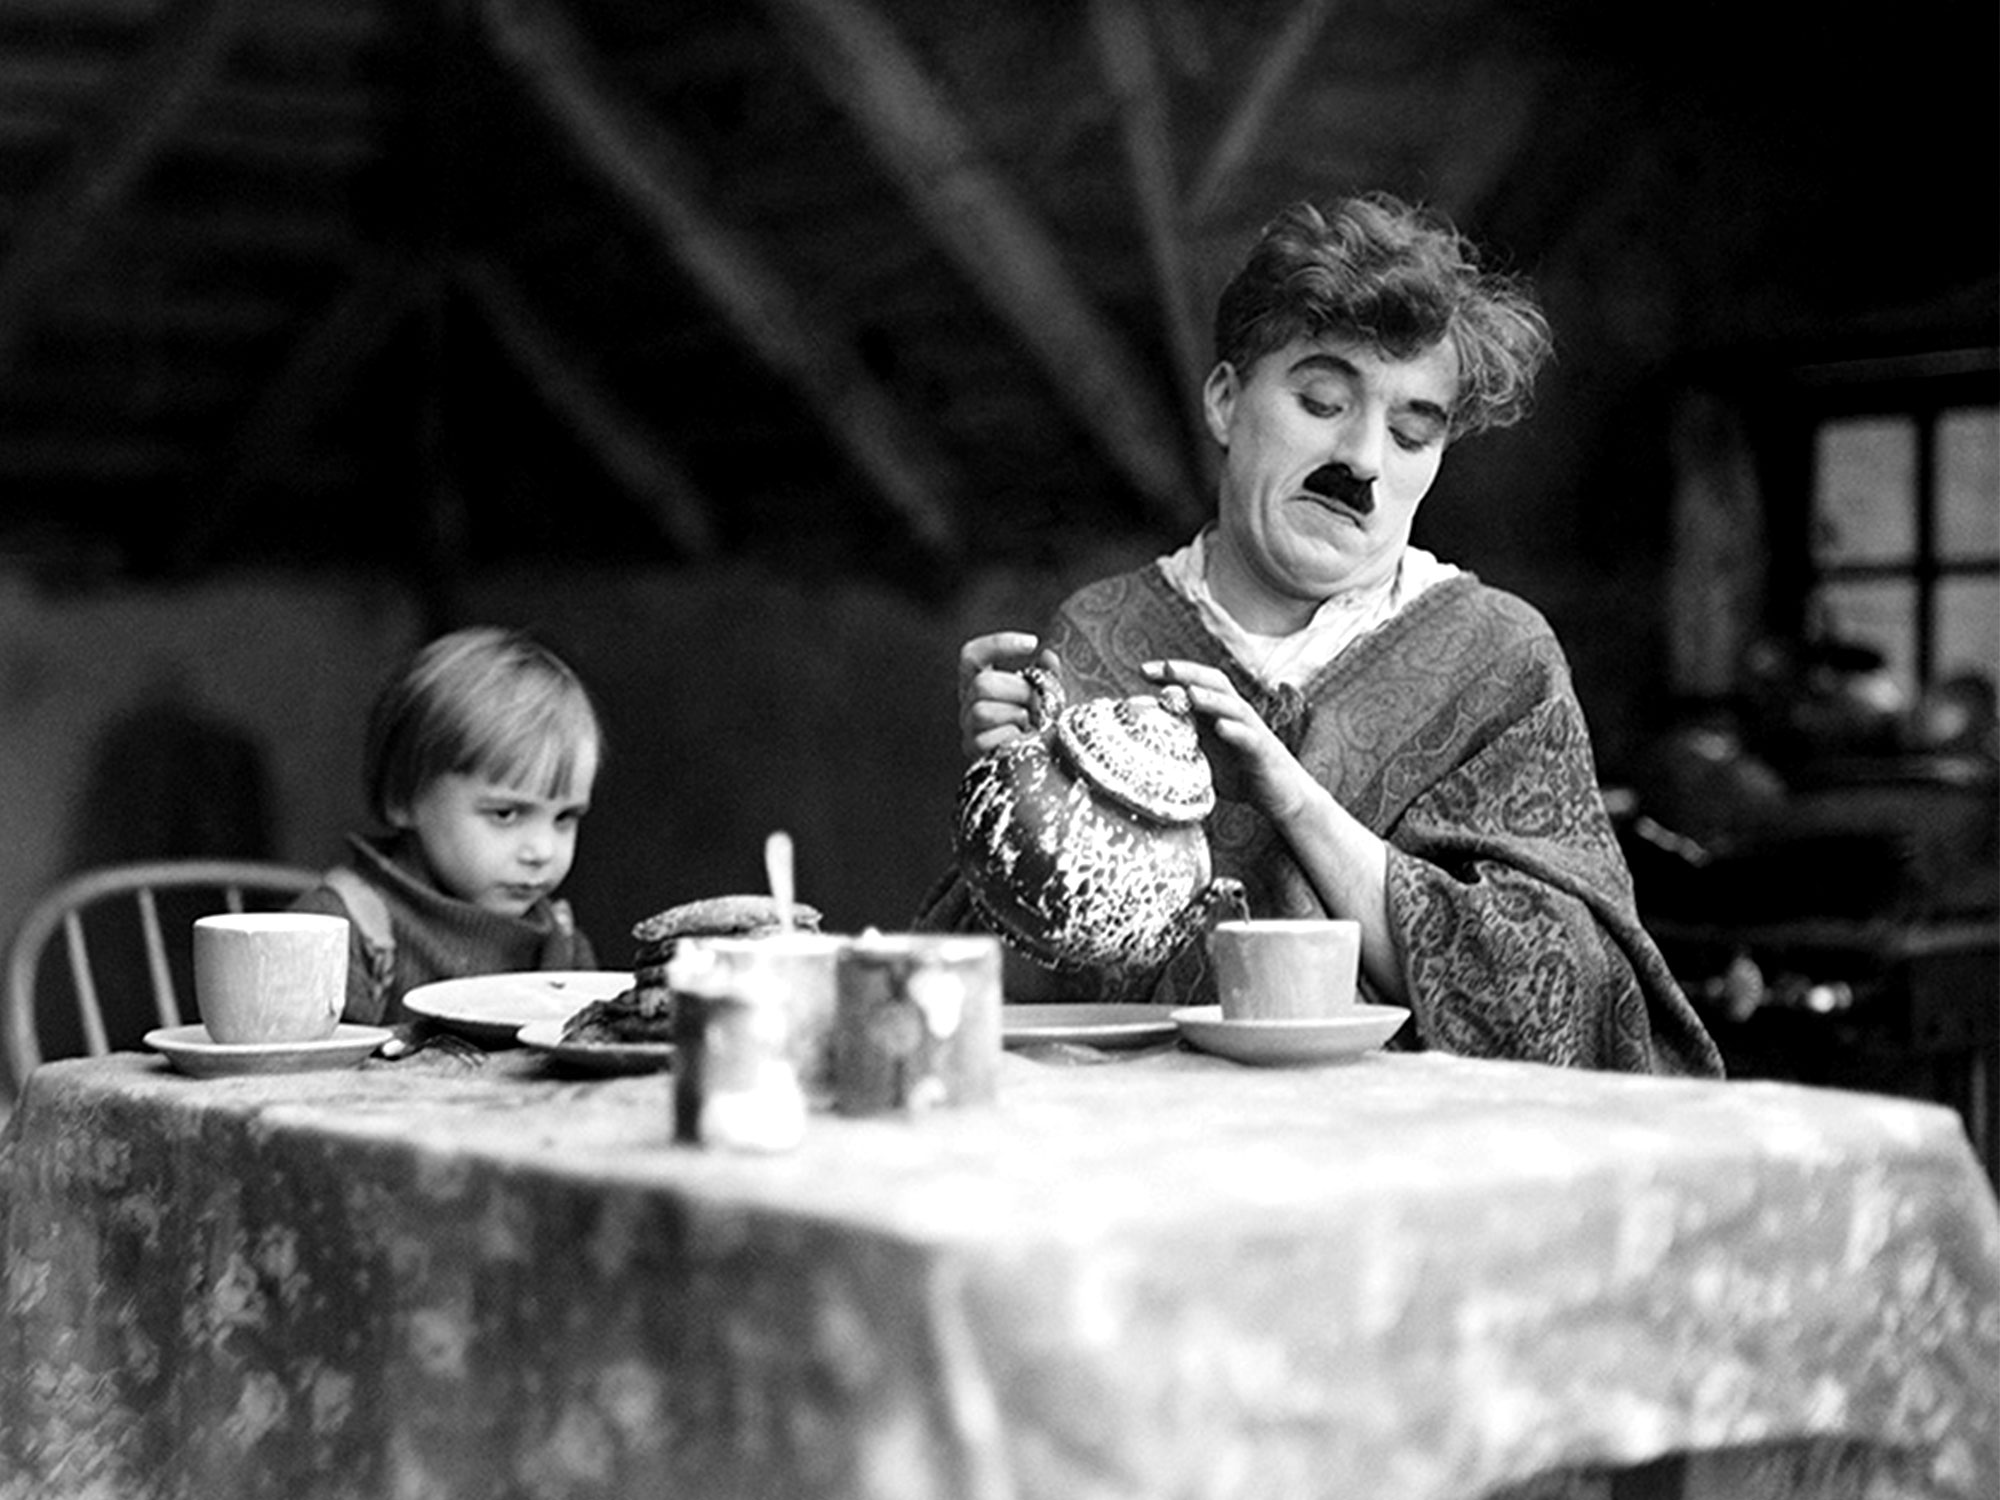 Revisiting The Kid's pancake scene 100 years on